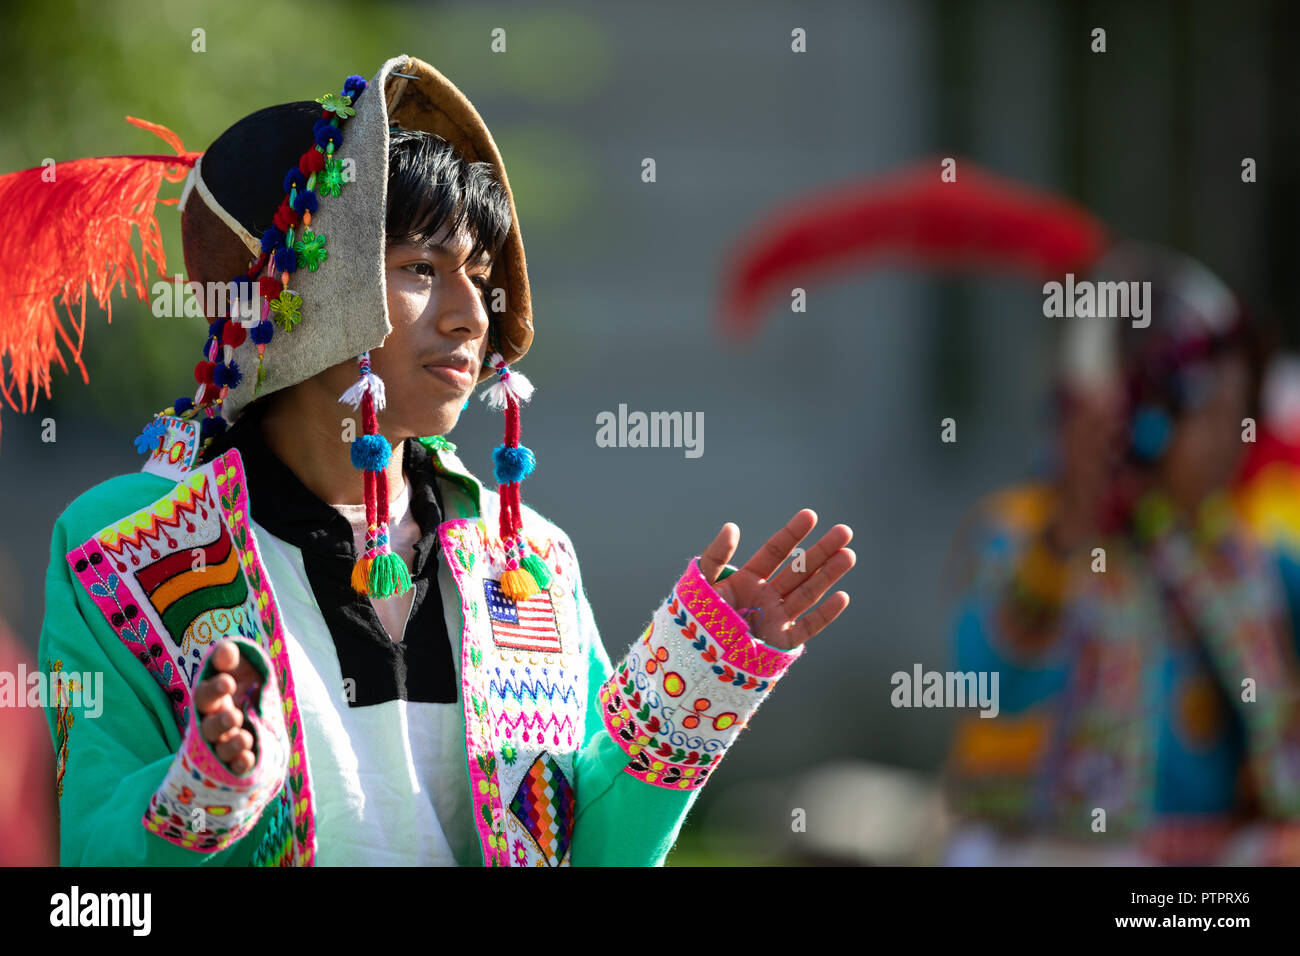 Washington, D.C., USA - September 29, 2018: The Fiesta DC Parade, young man from bolivia wearing traditional clothing walking down the street during t Stock Photo